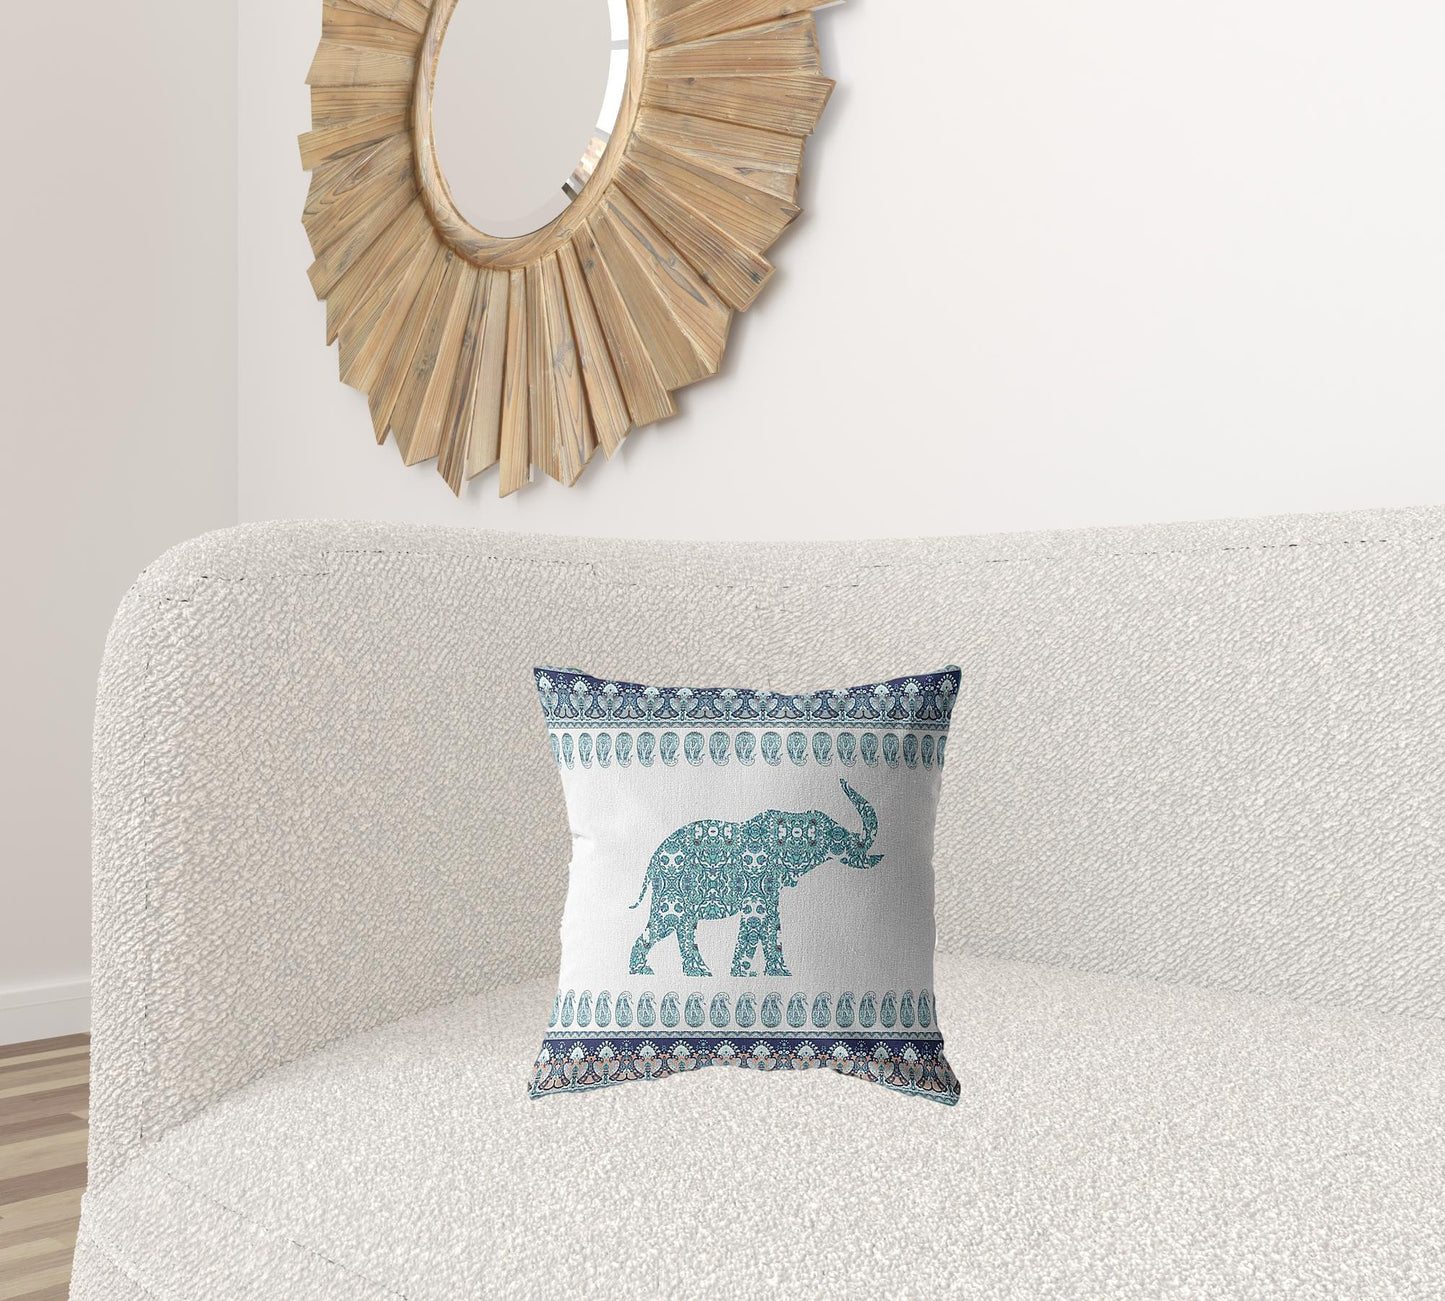 16” Teal Ornate Elephant Zippered Suede Throw Pillow